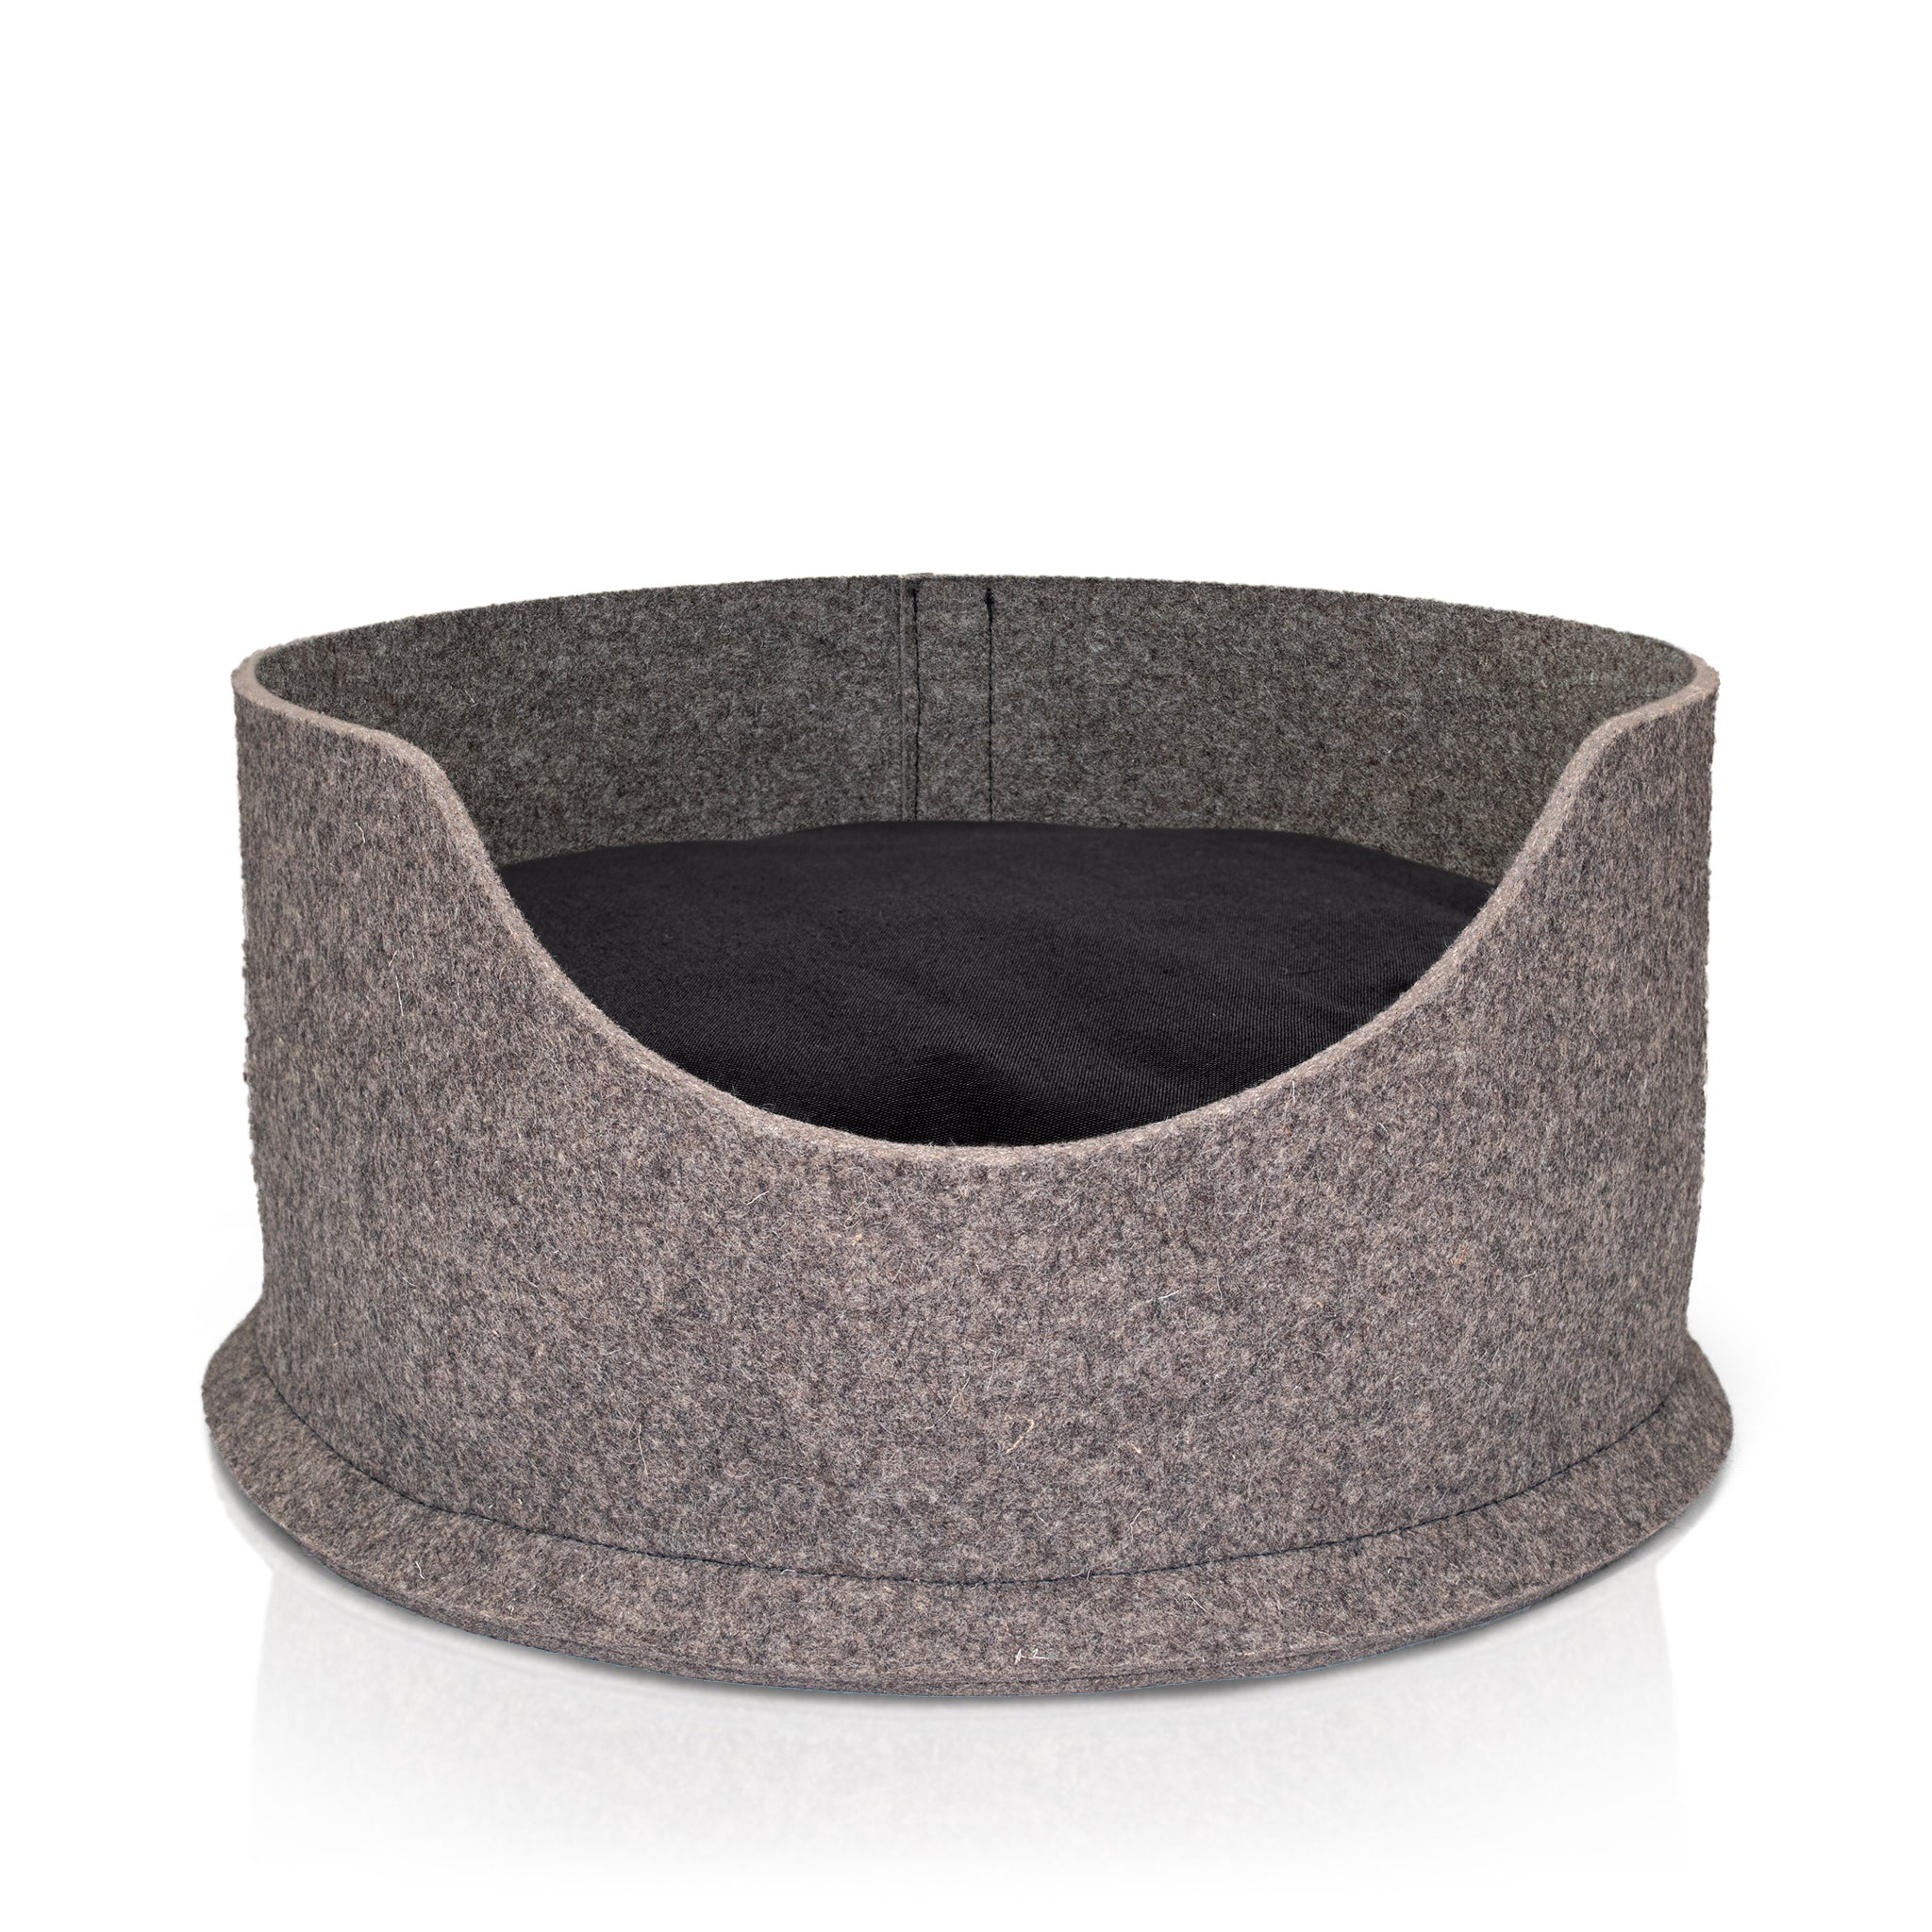 PetSnug Cat and Dog bed from Chimney Sheep. Handmade with a black cushion 